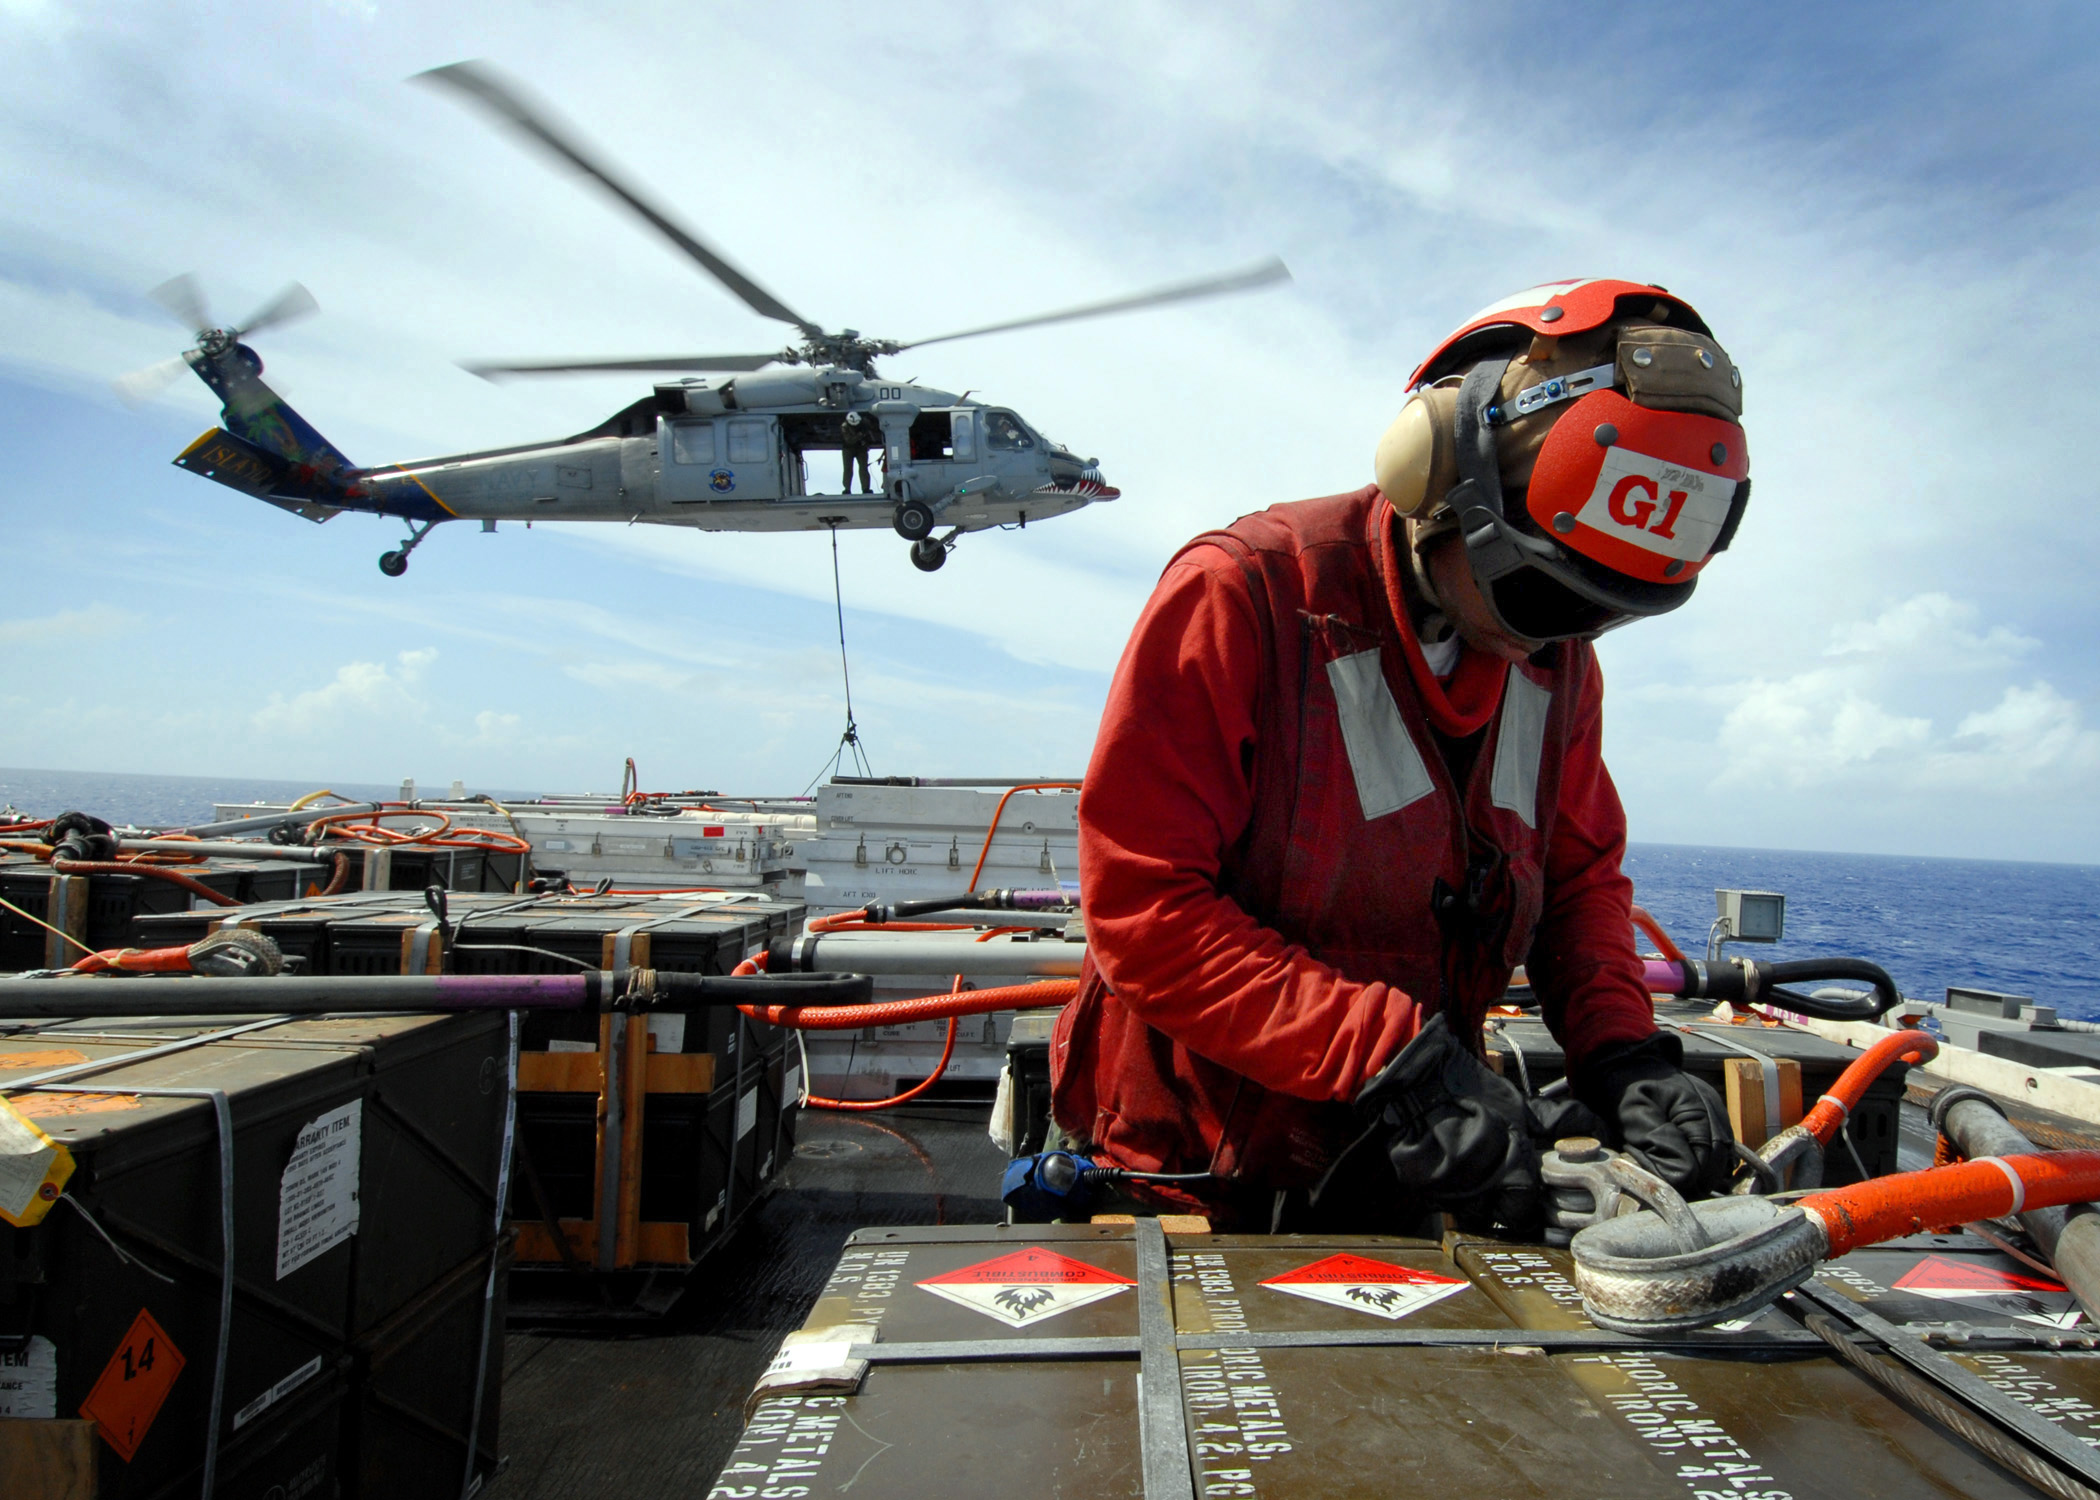 US Navy 081107-N-1038M-115 Aviation Ordnanceman Airman Jessica Jefferson attaches cables to a crate of ammunition as an MH-60S Sea Hawk